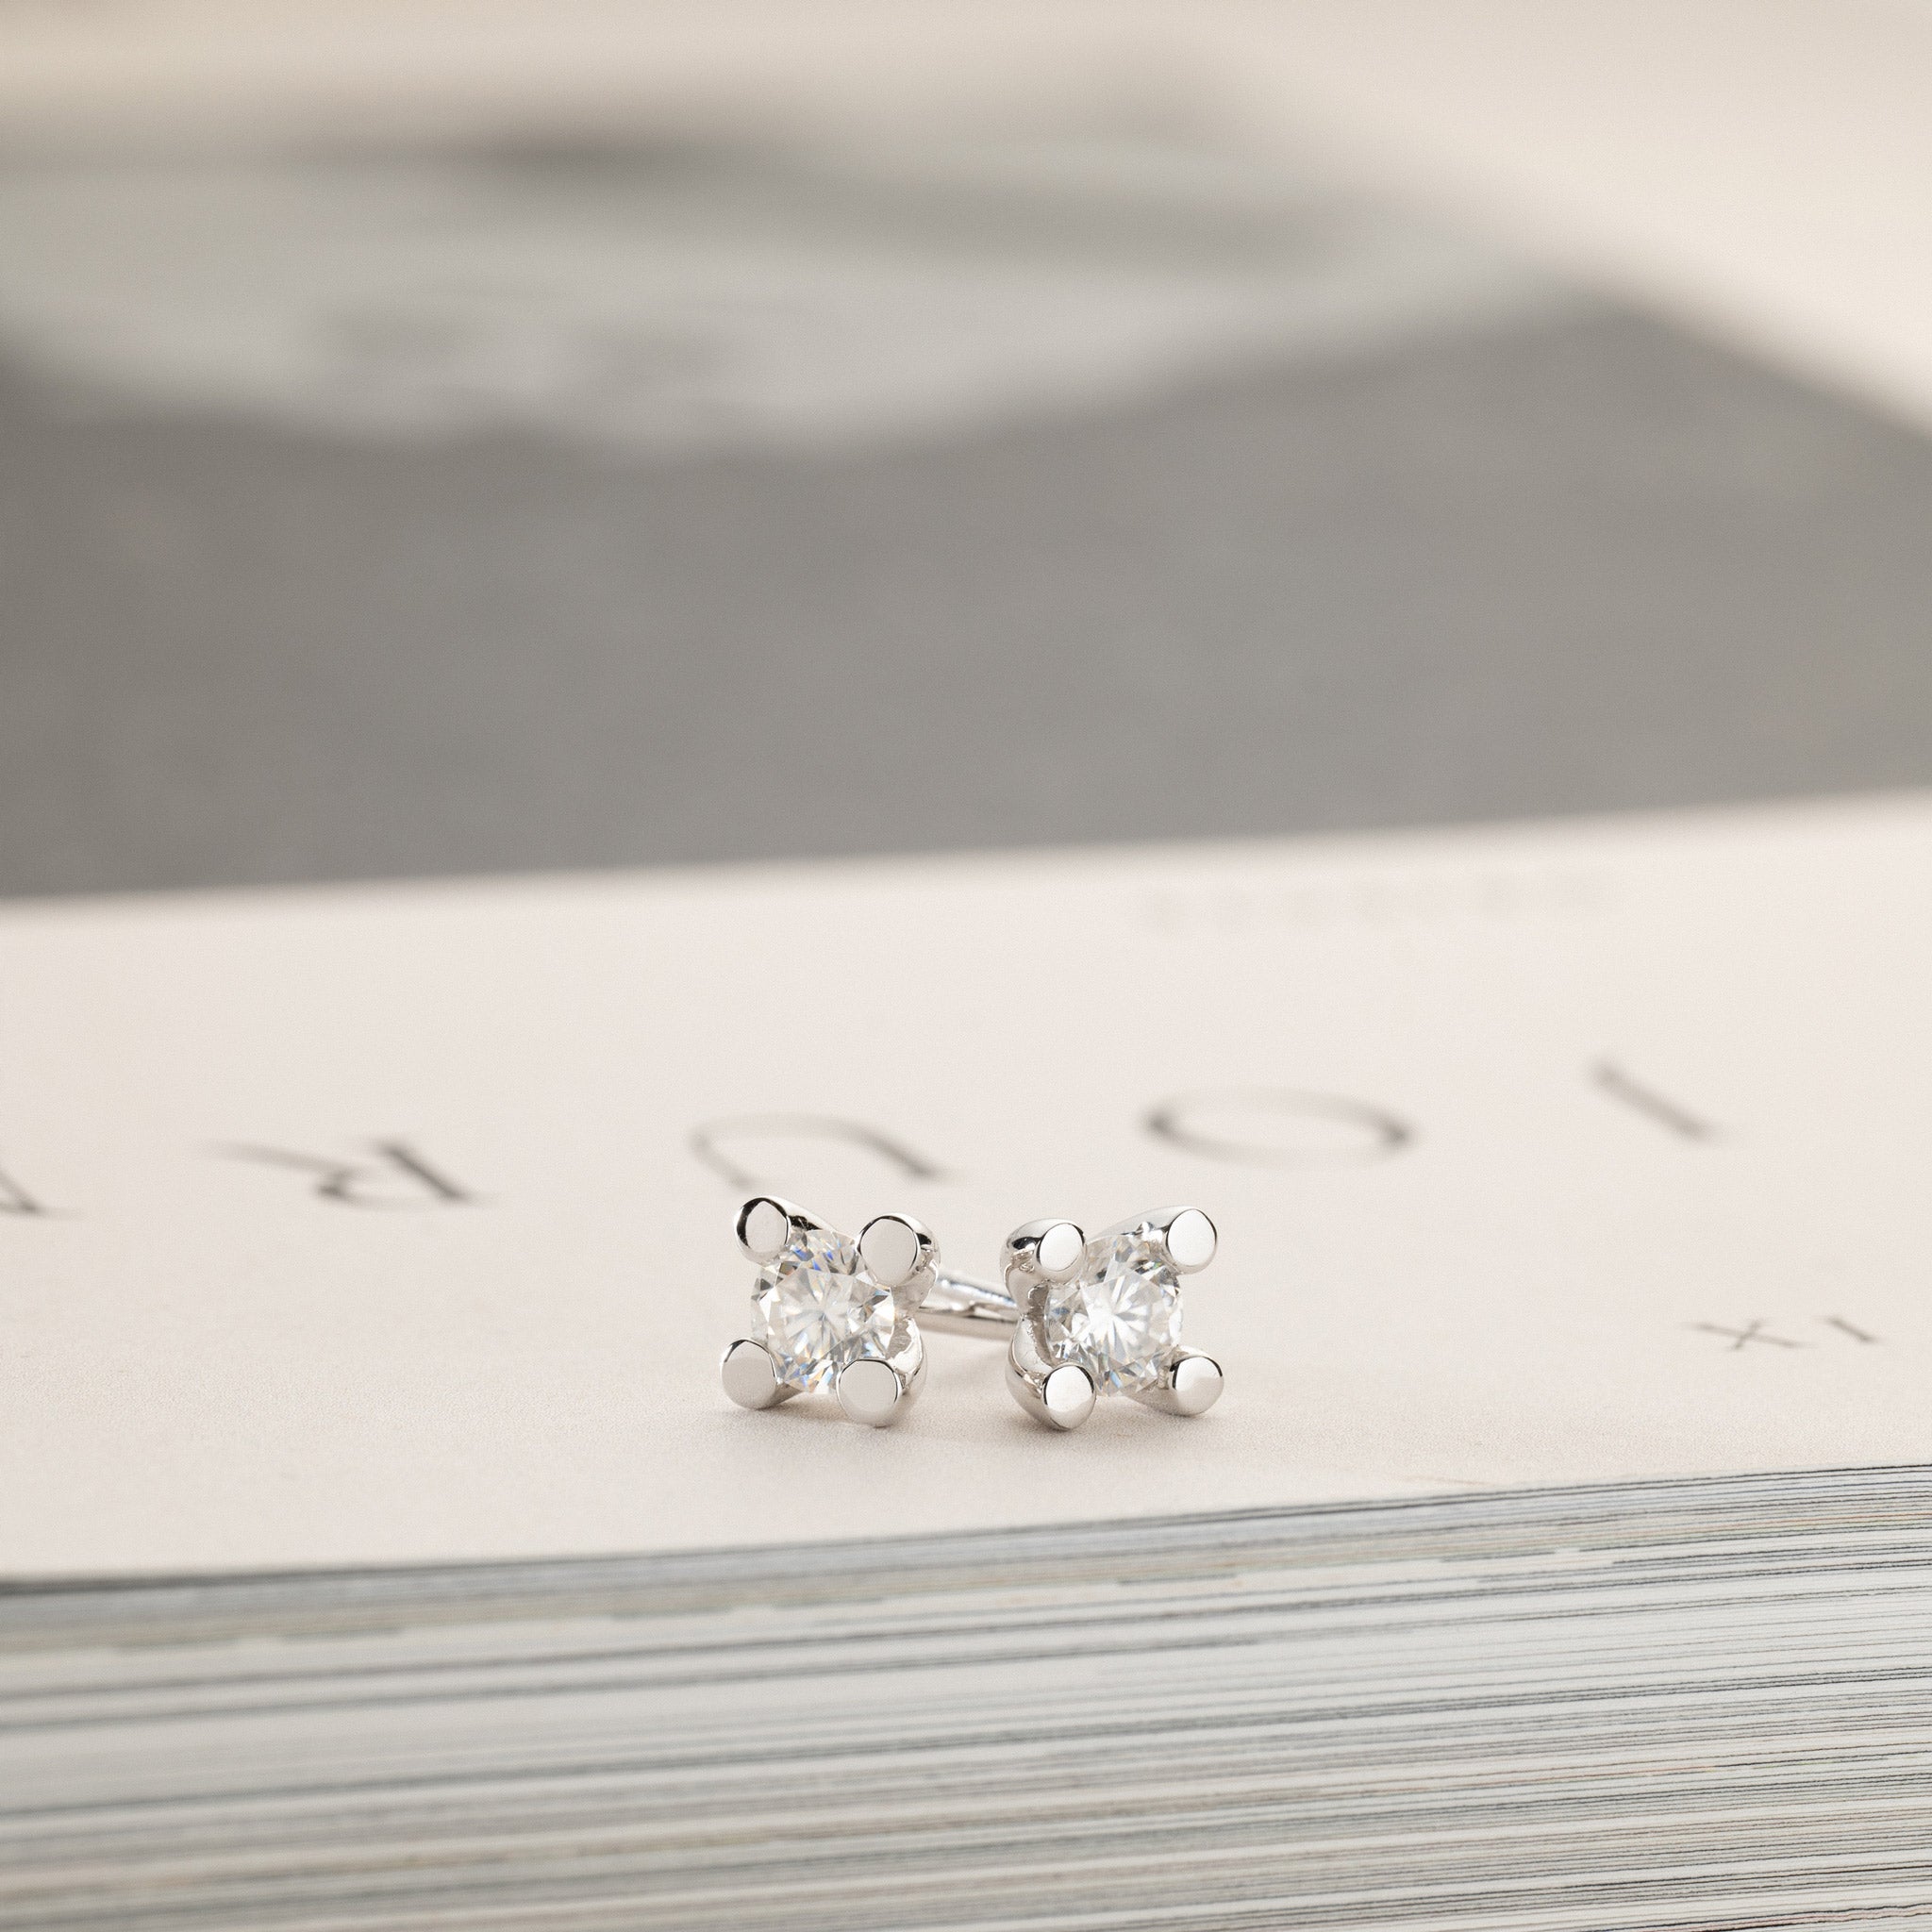 2x0.50ct Moissanite solitaire stud earrings silver Miriam